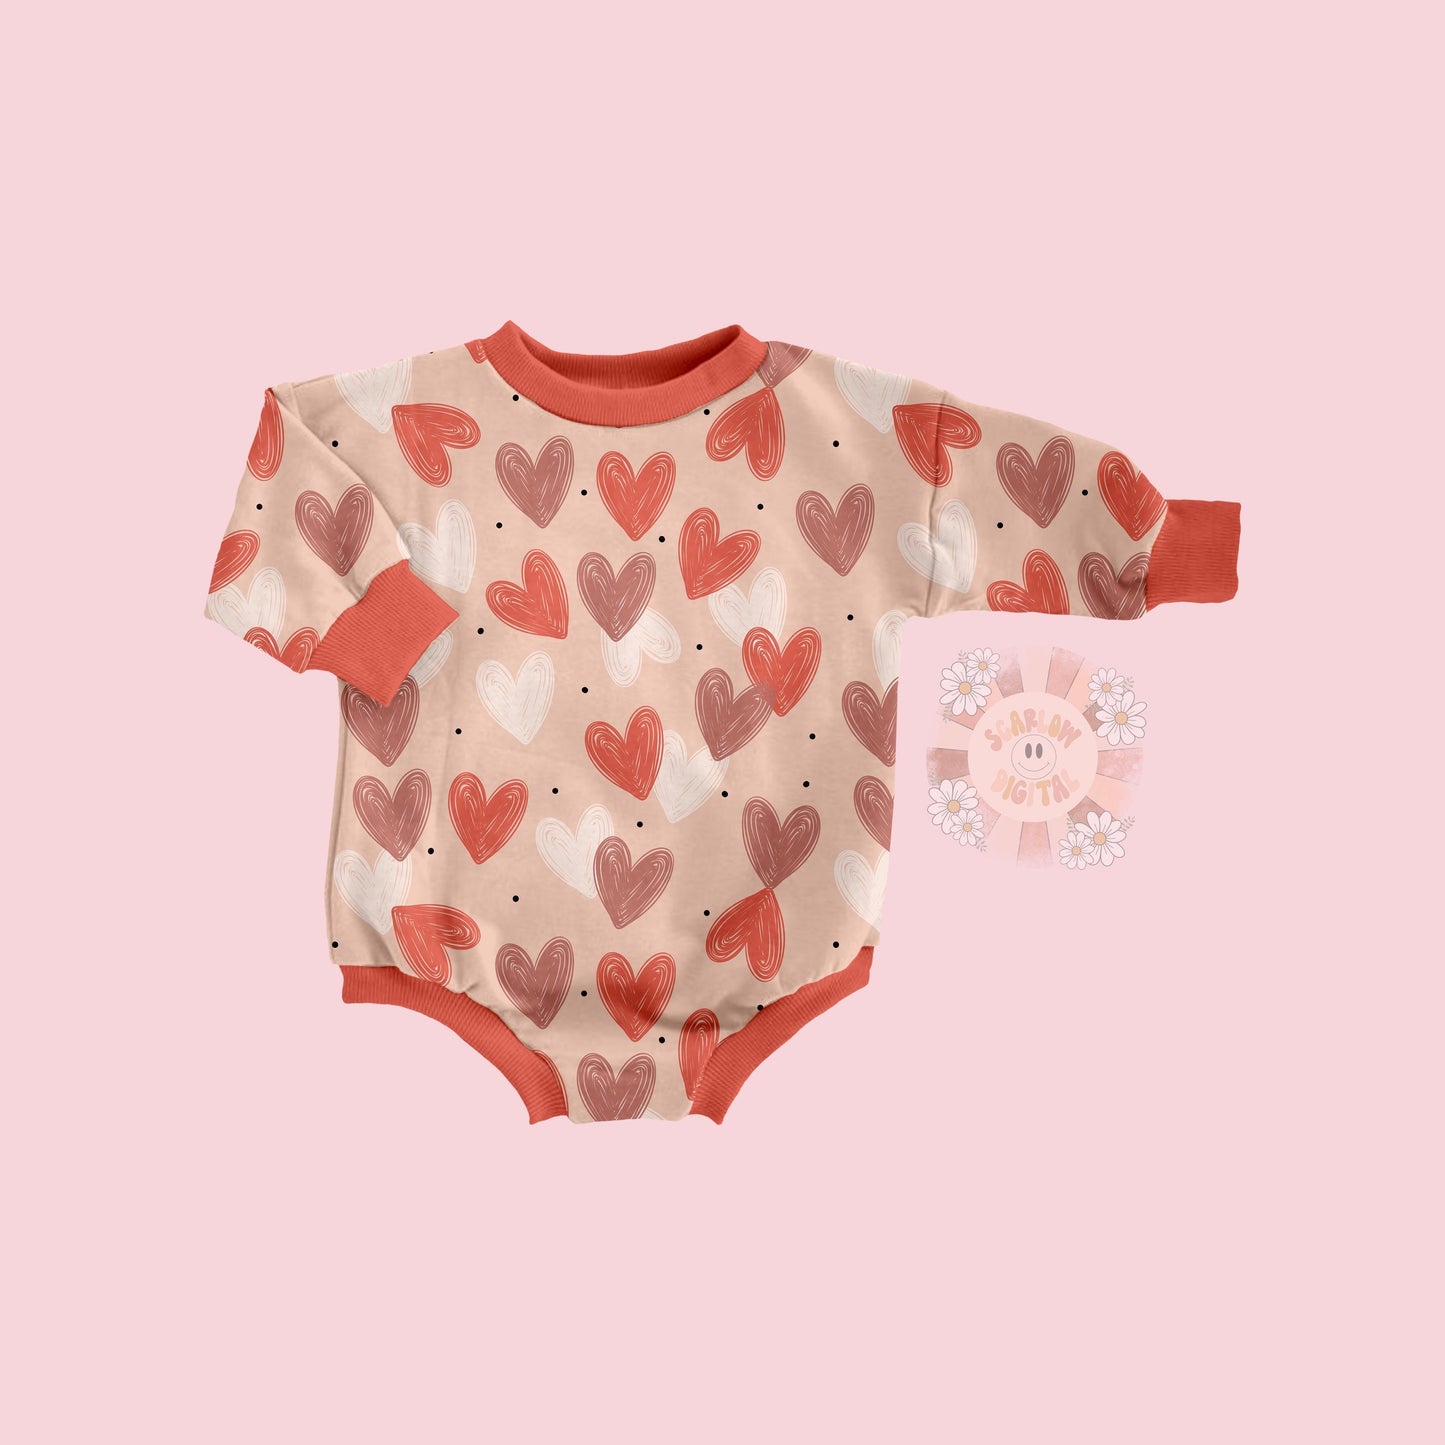 Doodle Hearts Seamless Pattern-Valentines Day Sublimation Digital Design Download-xoxo seamless pattern, vday sublimation, hearts seamless